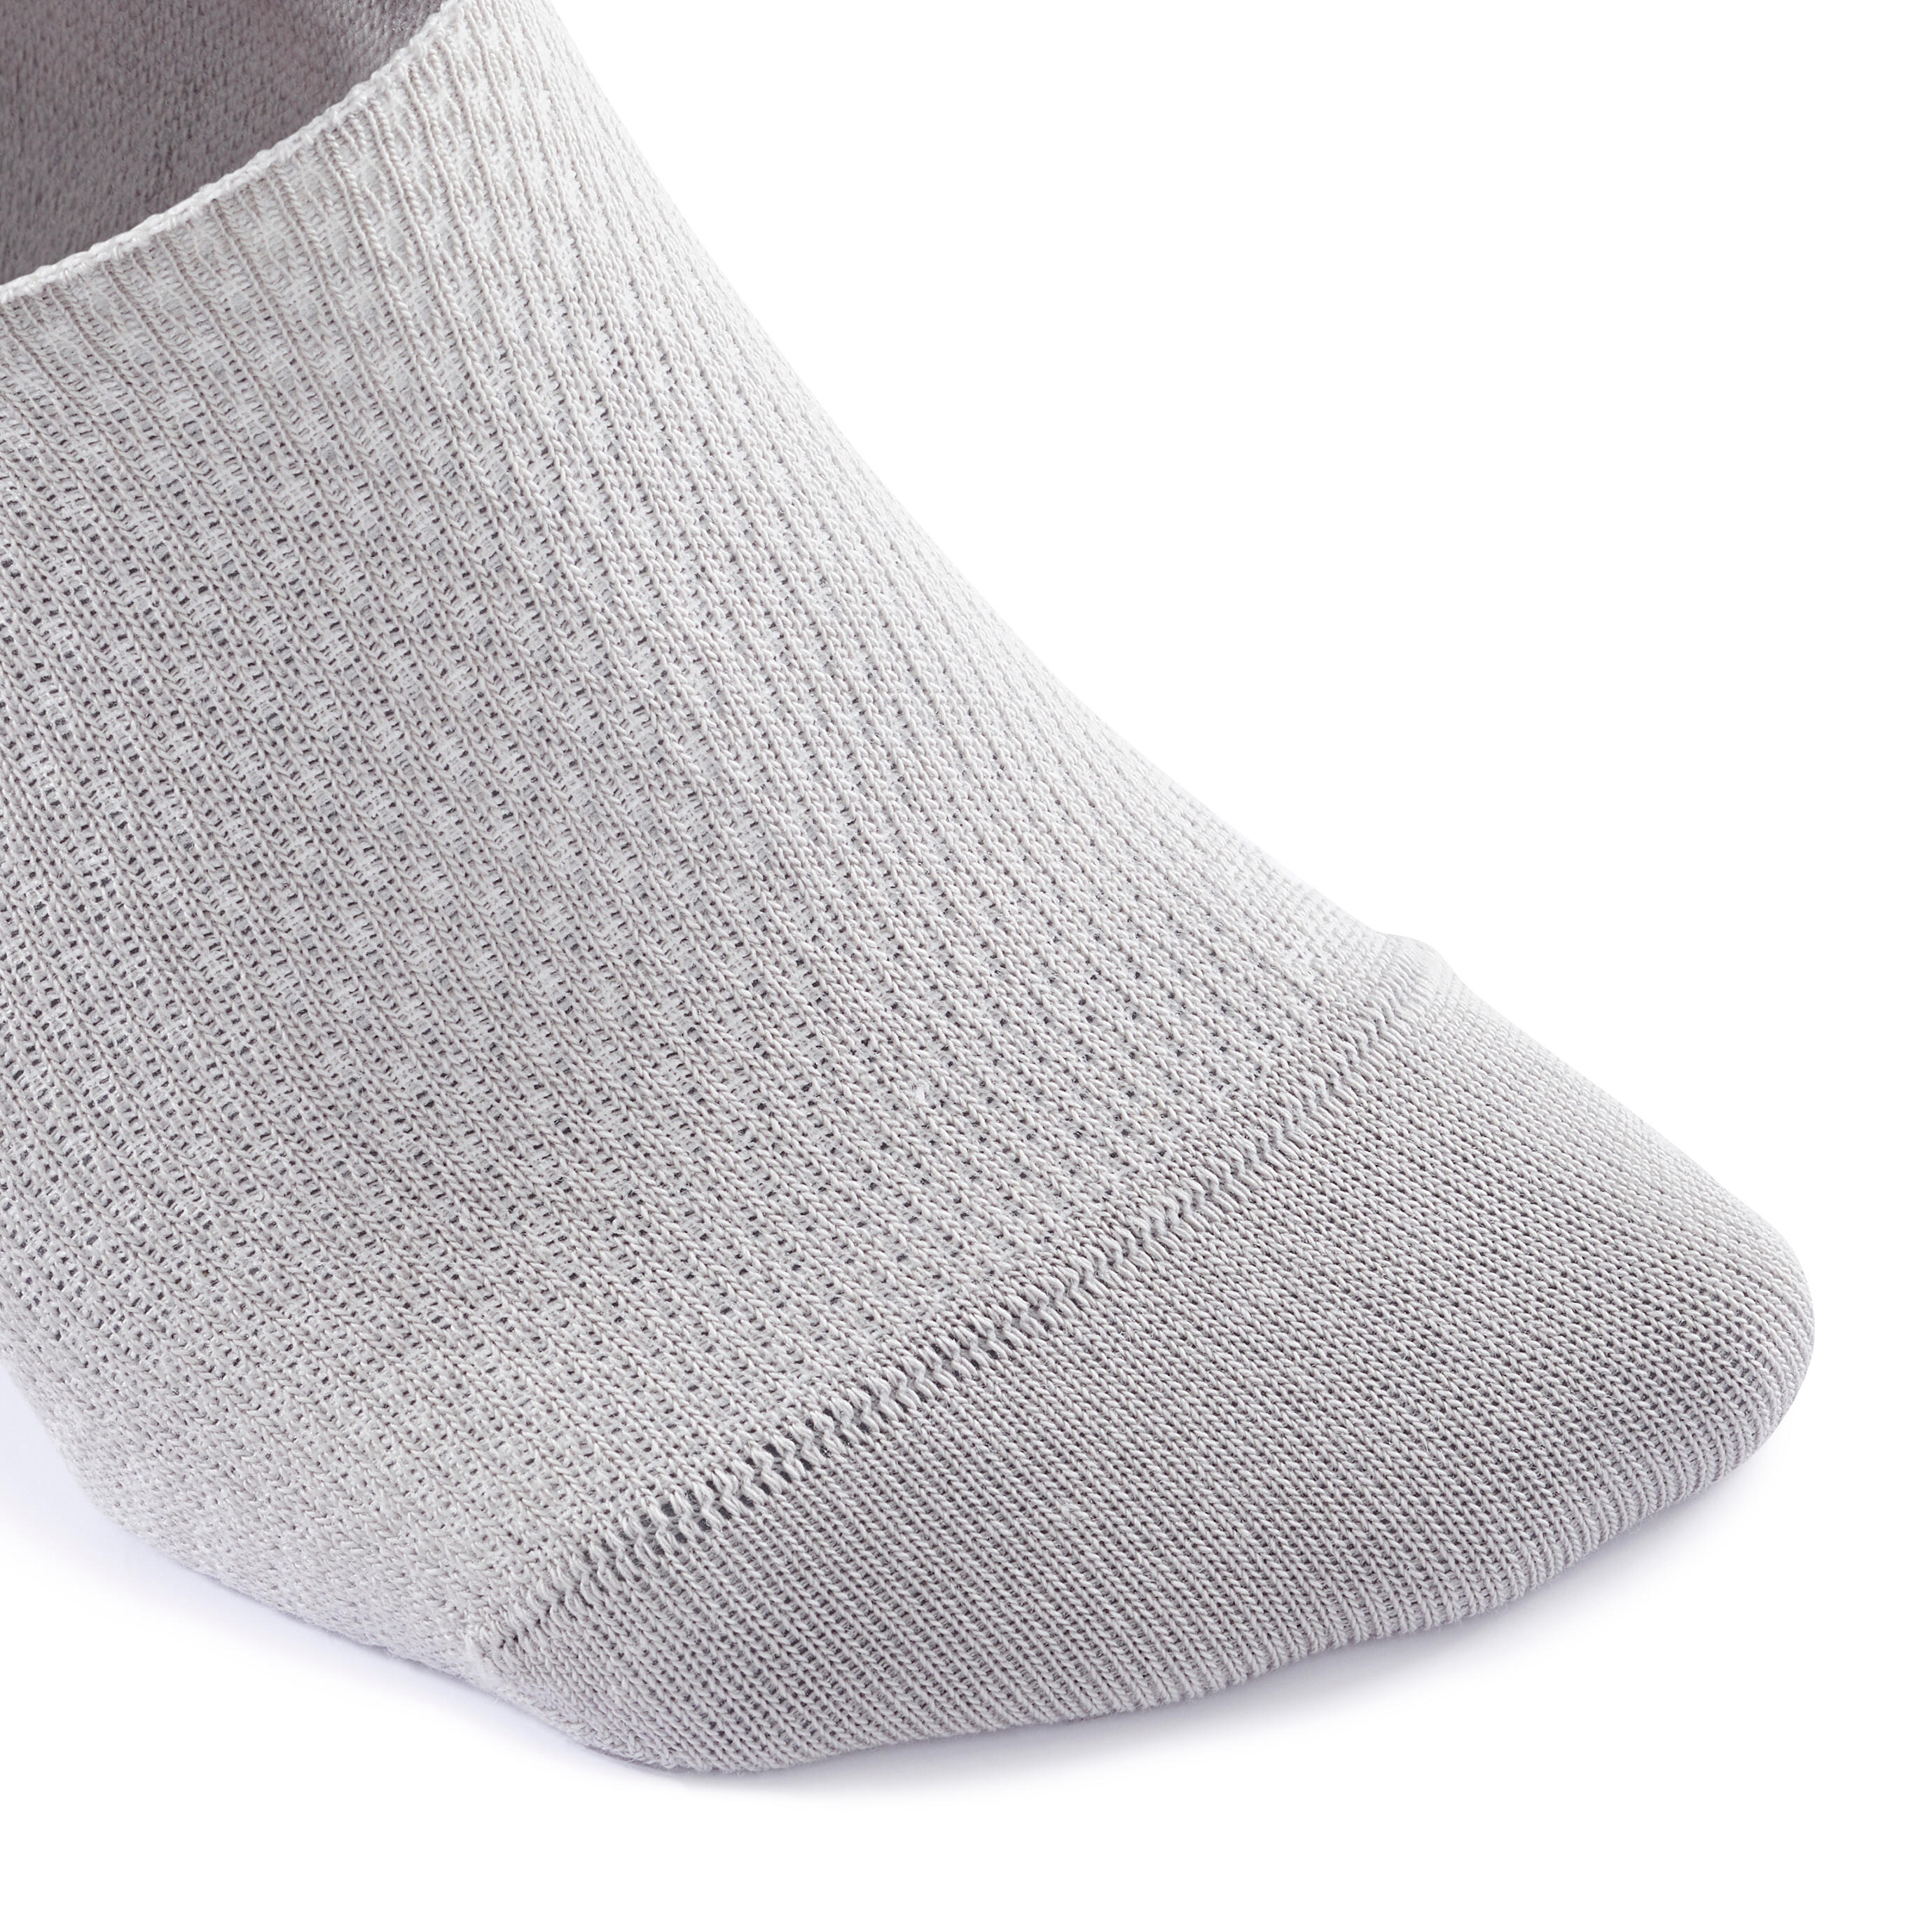 Invisible walking socks - pack of 2 pairs - white/grey 4/9